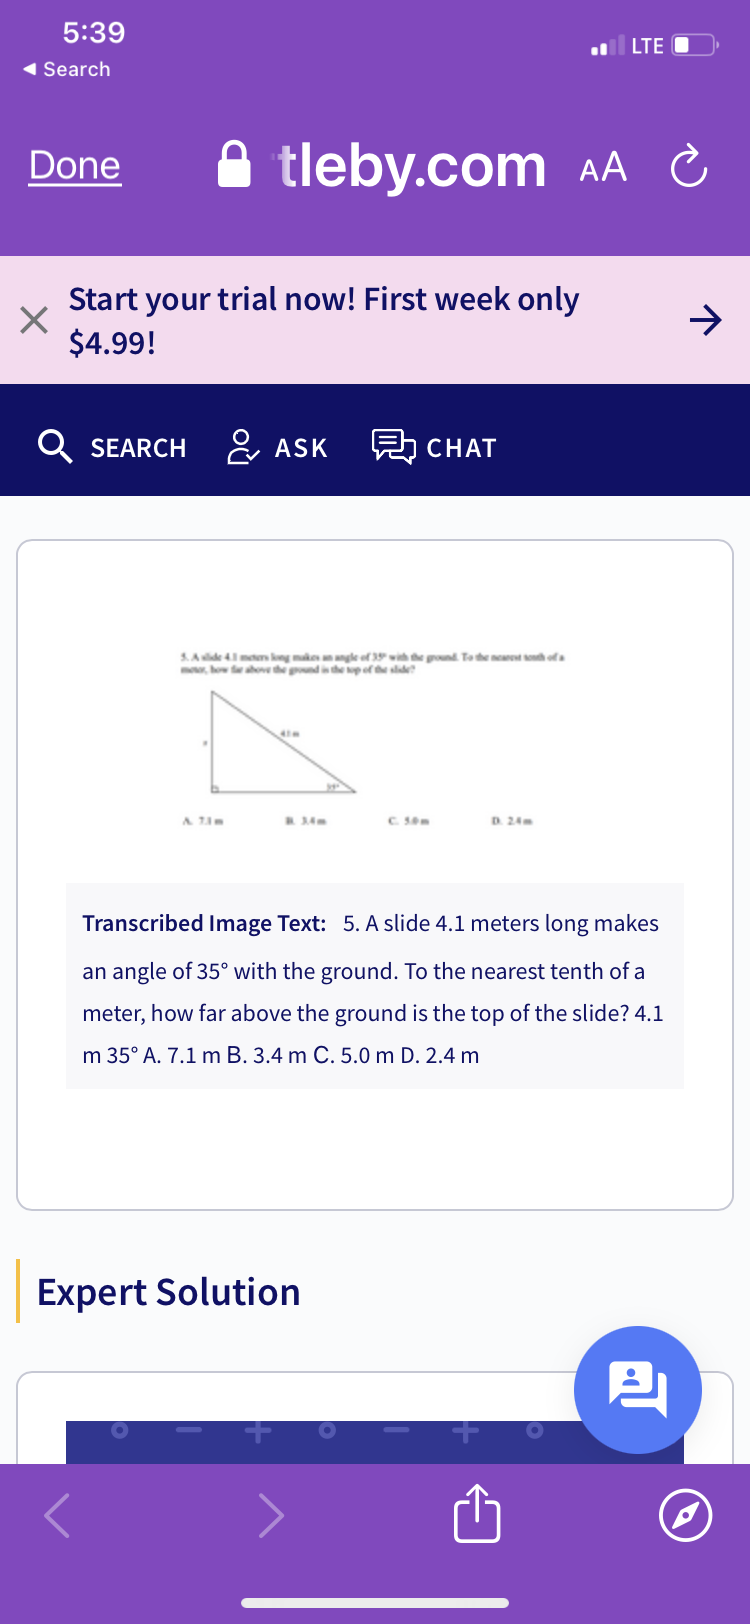 5:39
LTE O
AA C
◄ Search
Done
tleby.com
Start your trial now! First week only
$4.99!
Q SEARCH
ASK
見 CHAT
ground. To the nearest south of a
5.Aide 4.1 meters long makes an angle of 35
motor how far above the ground is the top of the slide?
& 7.3m
C. 50m
Transcribed Image Text: 5. A slide 4.1 meters long makes
an angle of 35° with the ground. To the nearest tenth of a
meter, how far above the ground is the top of the slide? 4.1
m 35° A. 7.1 m B. 3.4 m C. 5.0 m D. 2.4 m
Expert Solution
2
→